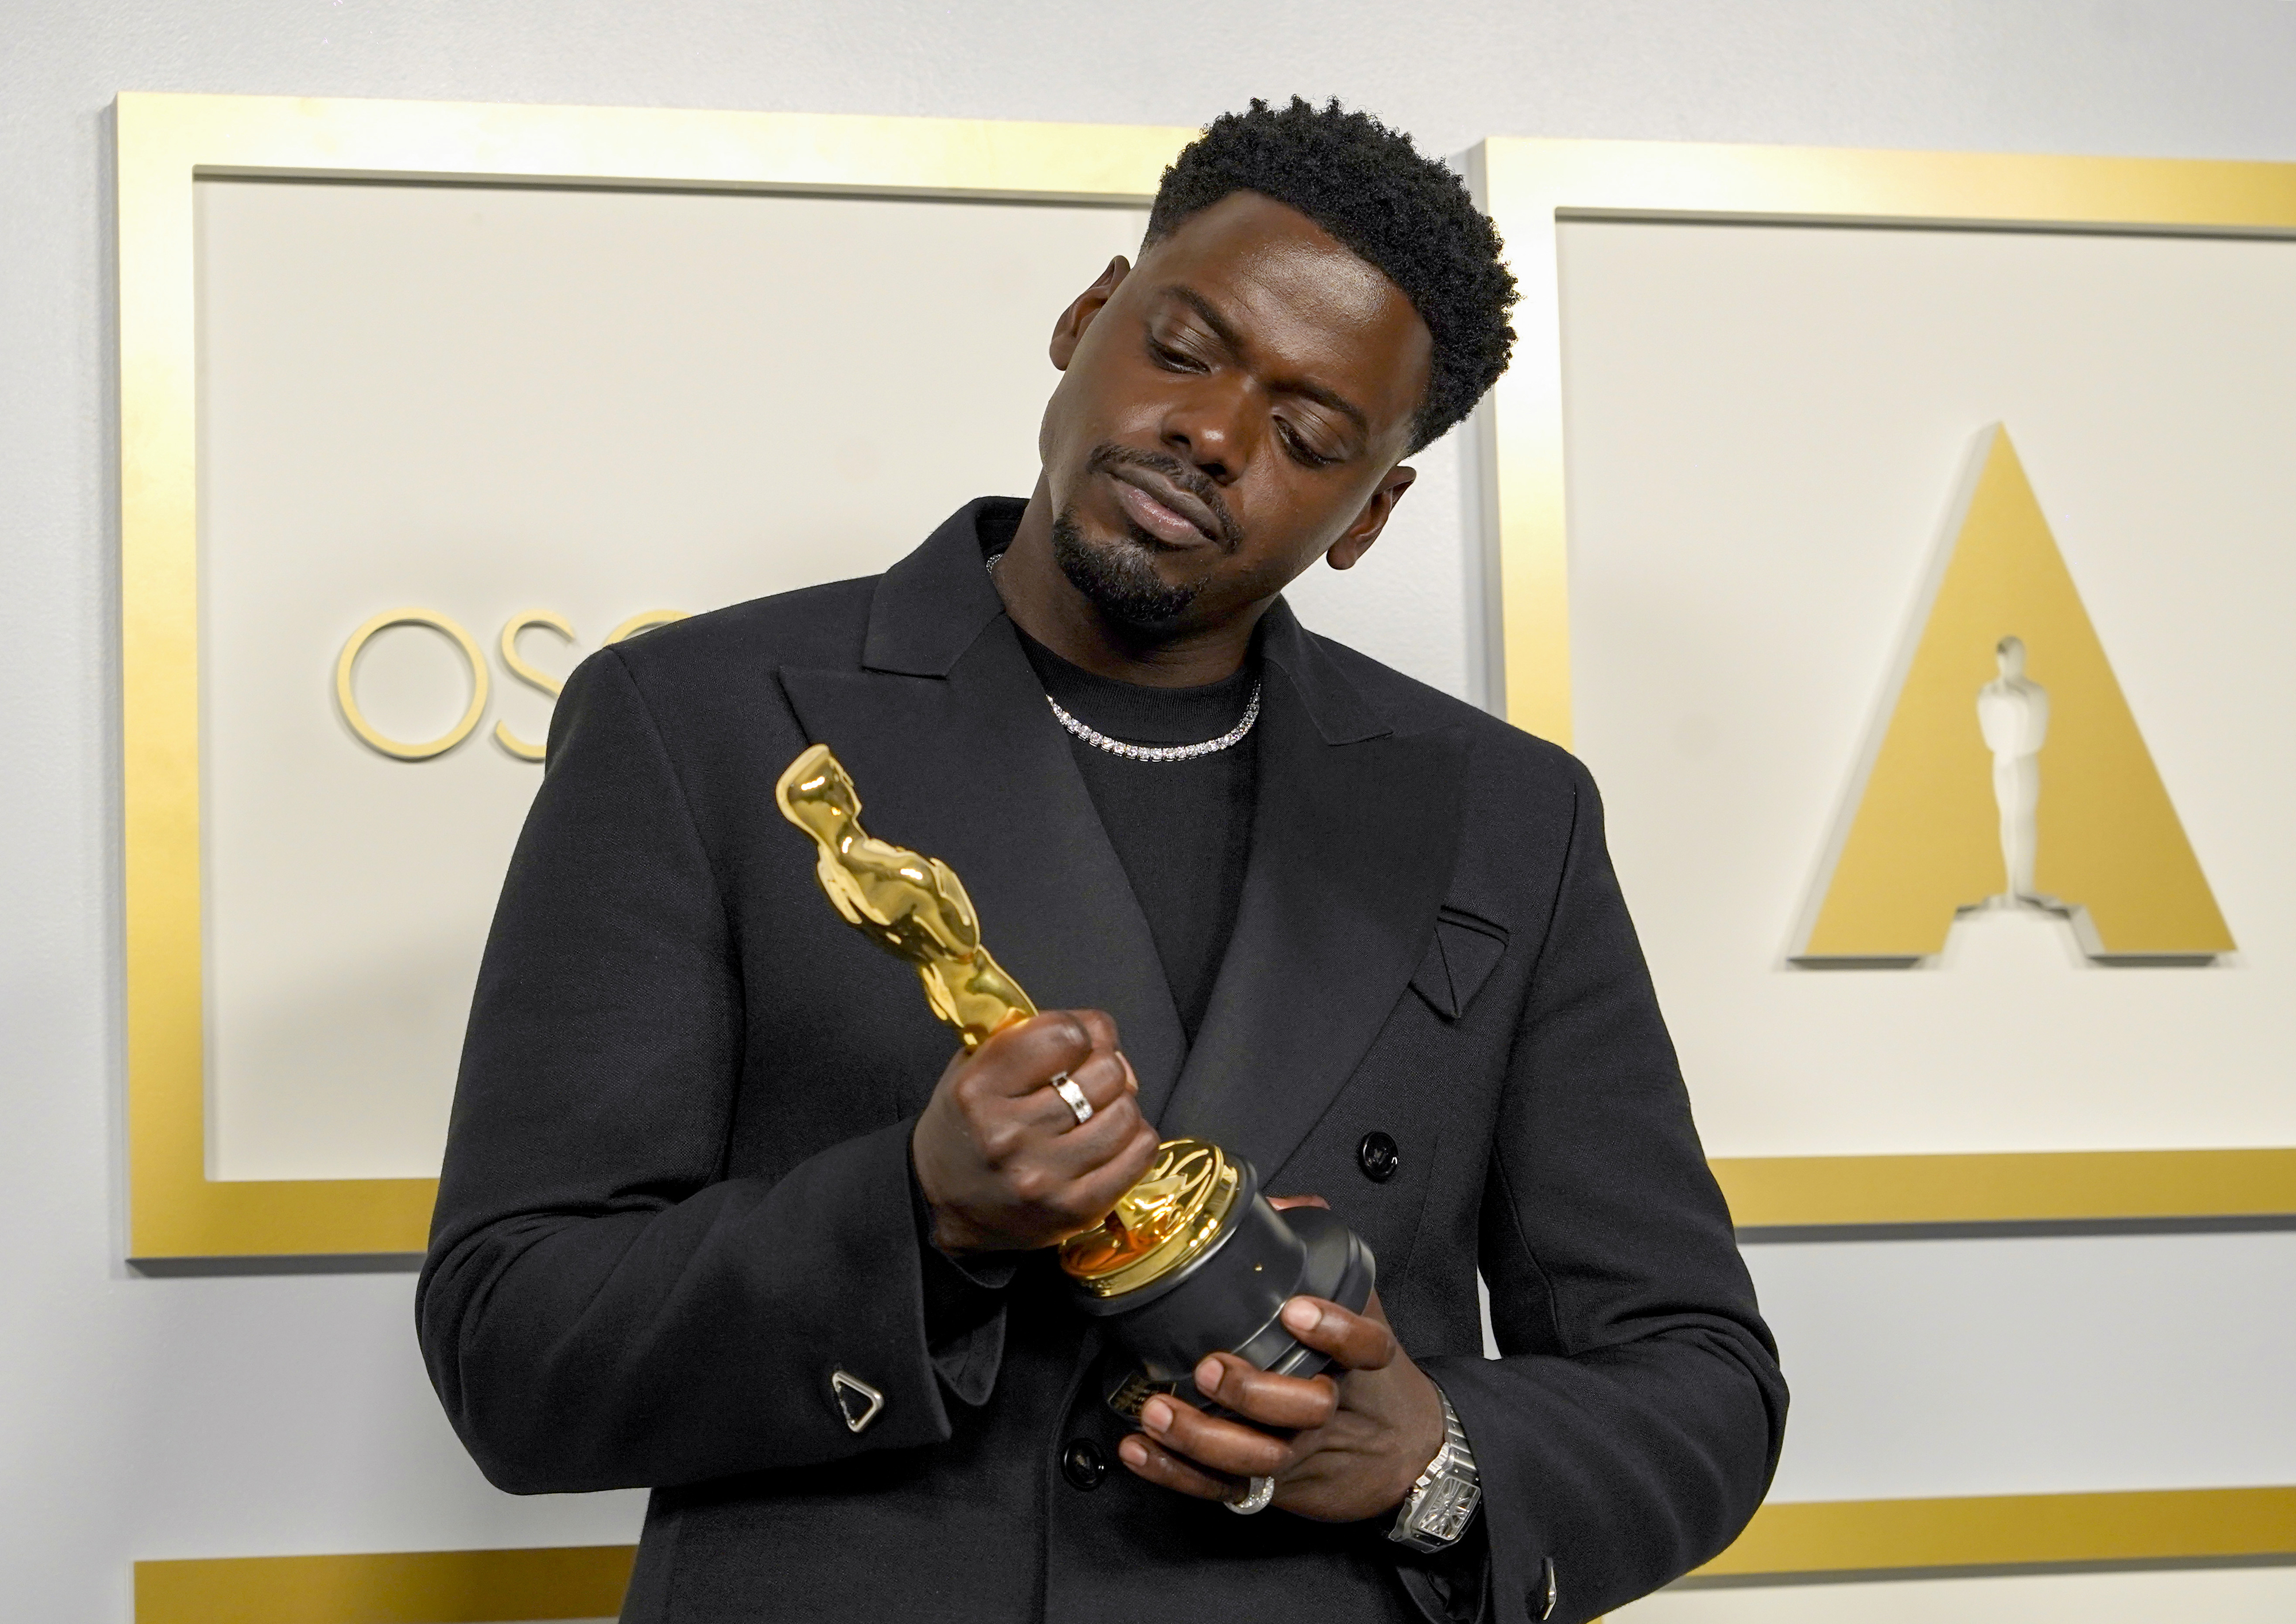 Daniel Kaluuya in a suit holding his Oscar statuette